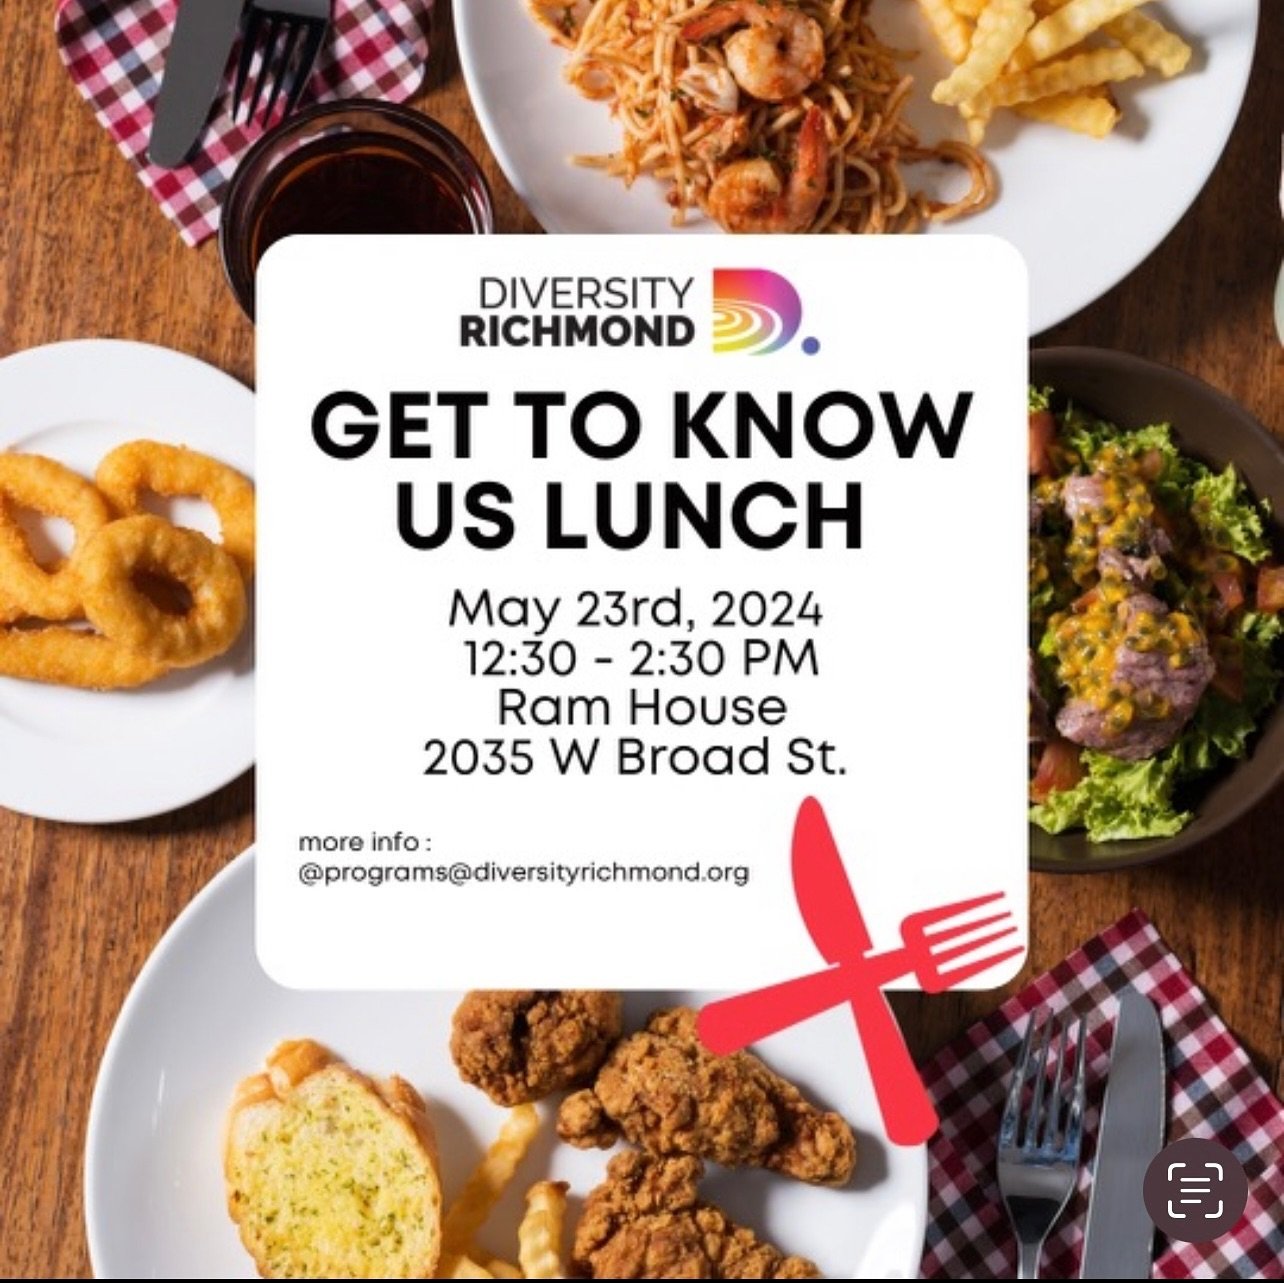 Join us at RAM House on May 23rd from 12:30-2:30pm for a special luncheon event! Get to know the new faces of Diversity Richmond and mingle with community members over lunch. RSVP by emailing programs@diversityrichmond.org. 

Don&rsquo;t miss this op